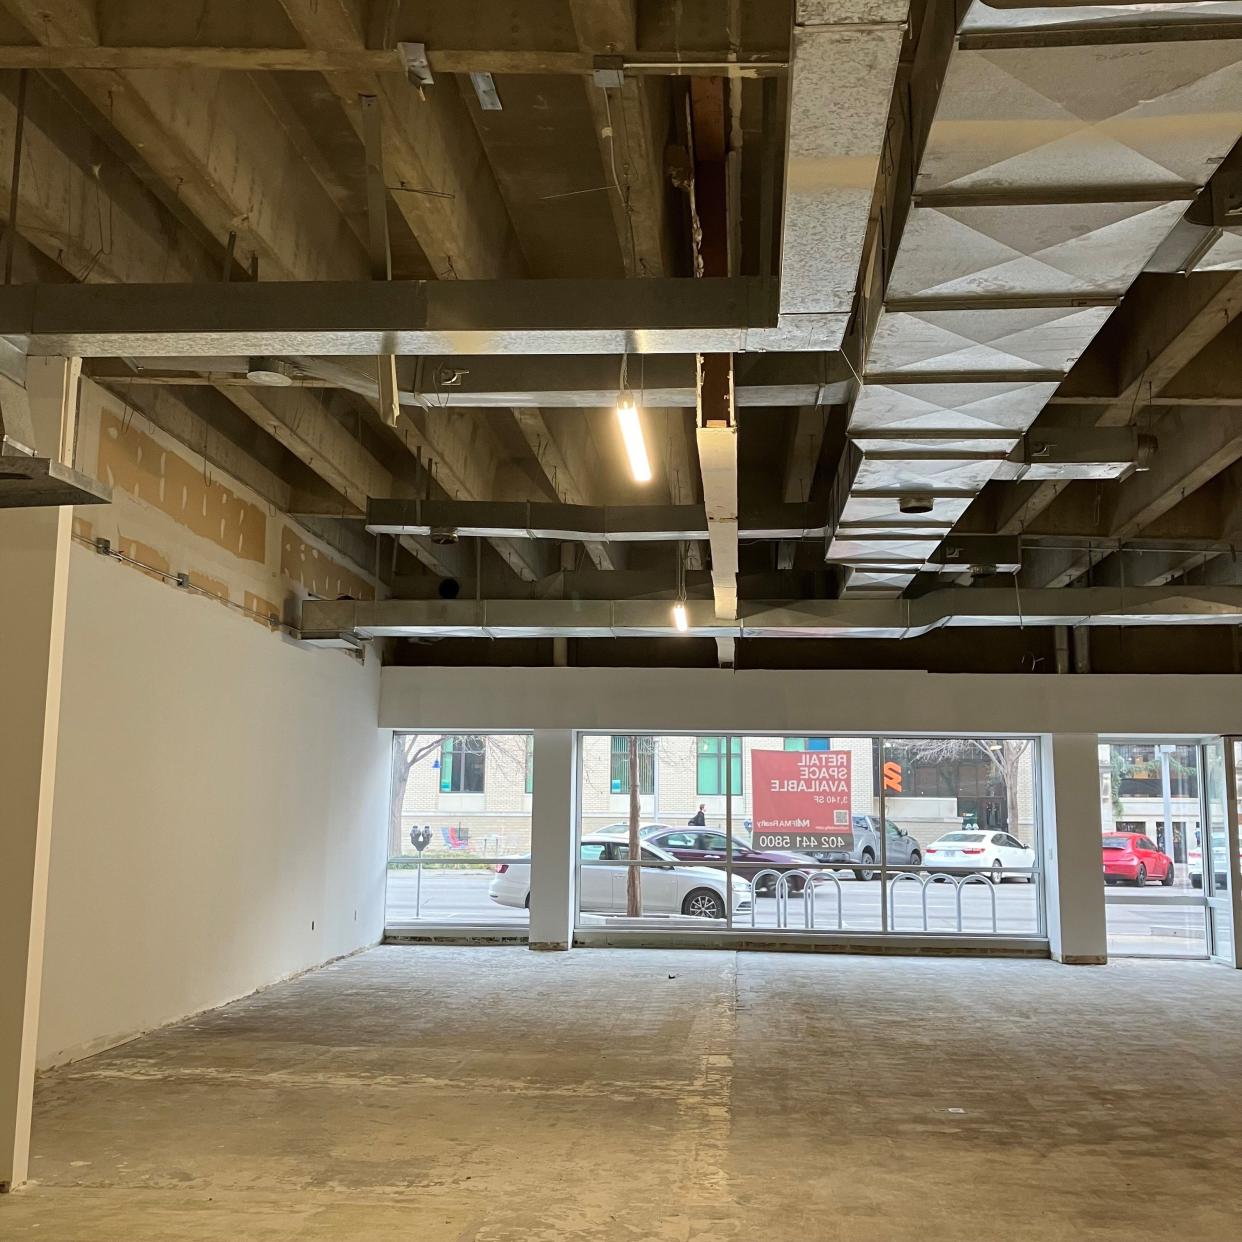 Inside the space where Raygun plans to open a store at 1219 P St. in Lincoln, Nebraska, in June.